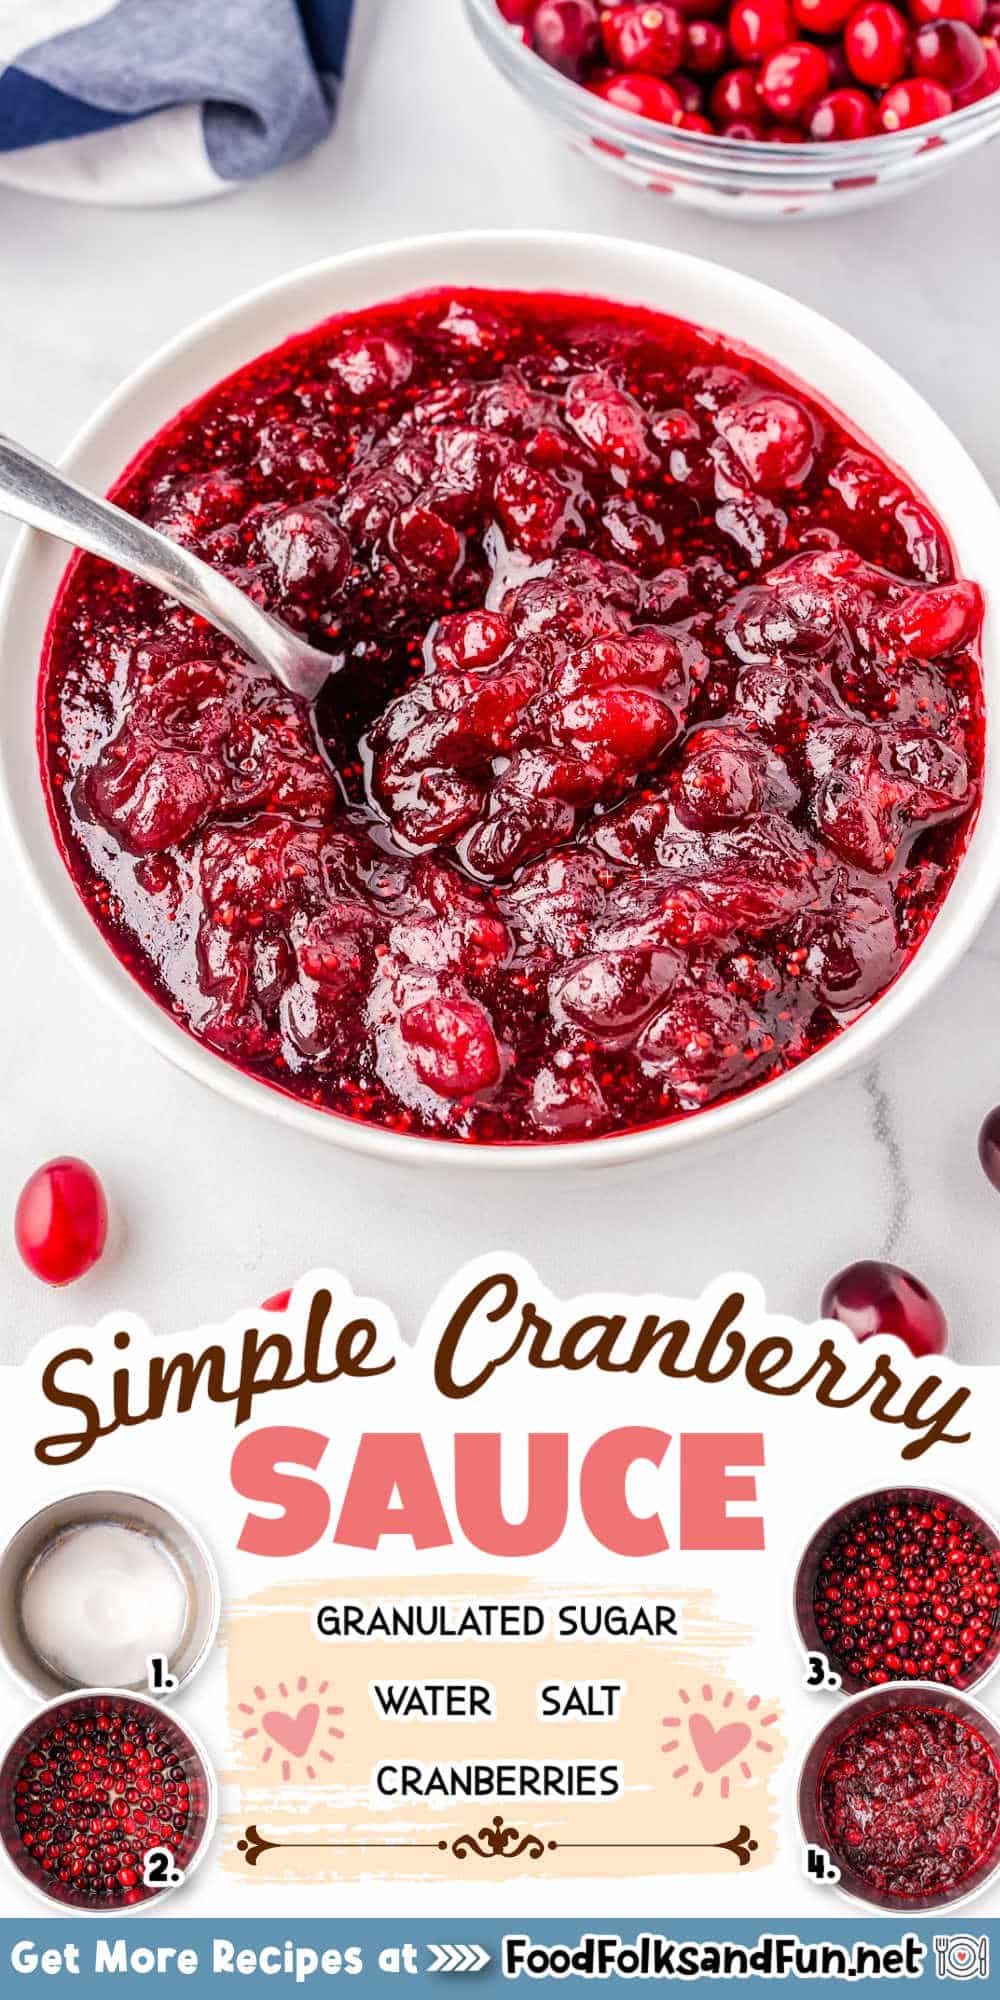 Thanksgiving isn't the same without some good old cranberry sauce! This Simple Cranberry Sauce recipe requires just four ingredients, making it a breeze even for novice cooks. via @foodfolksandfun